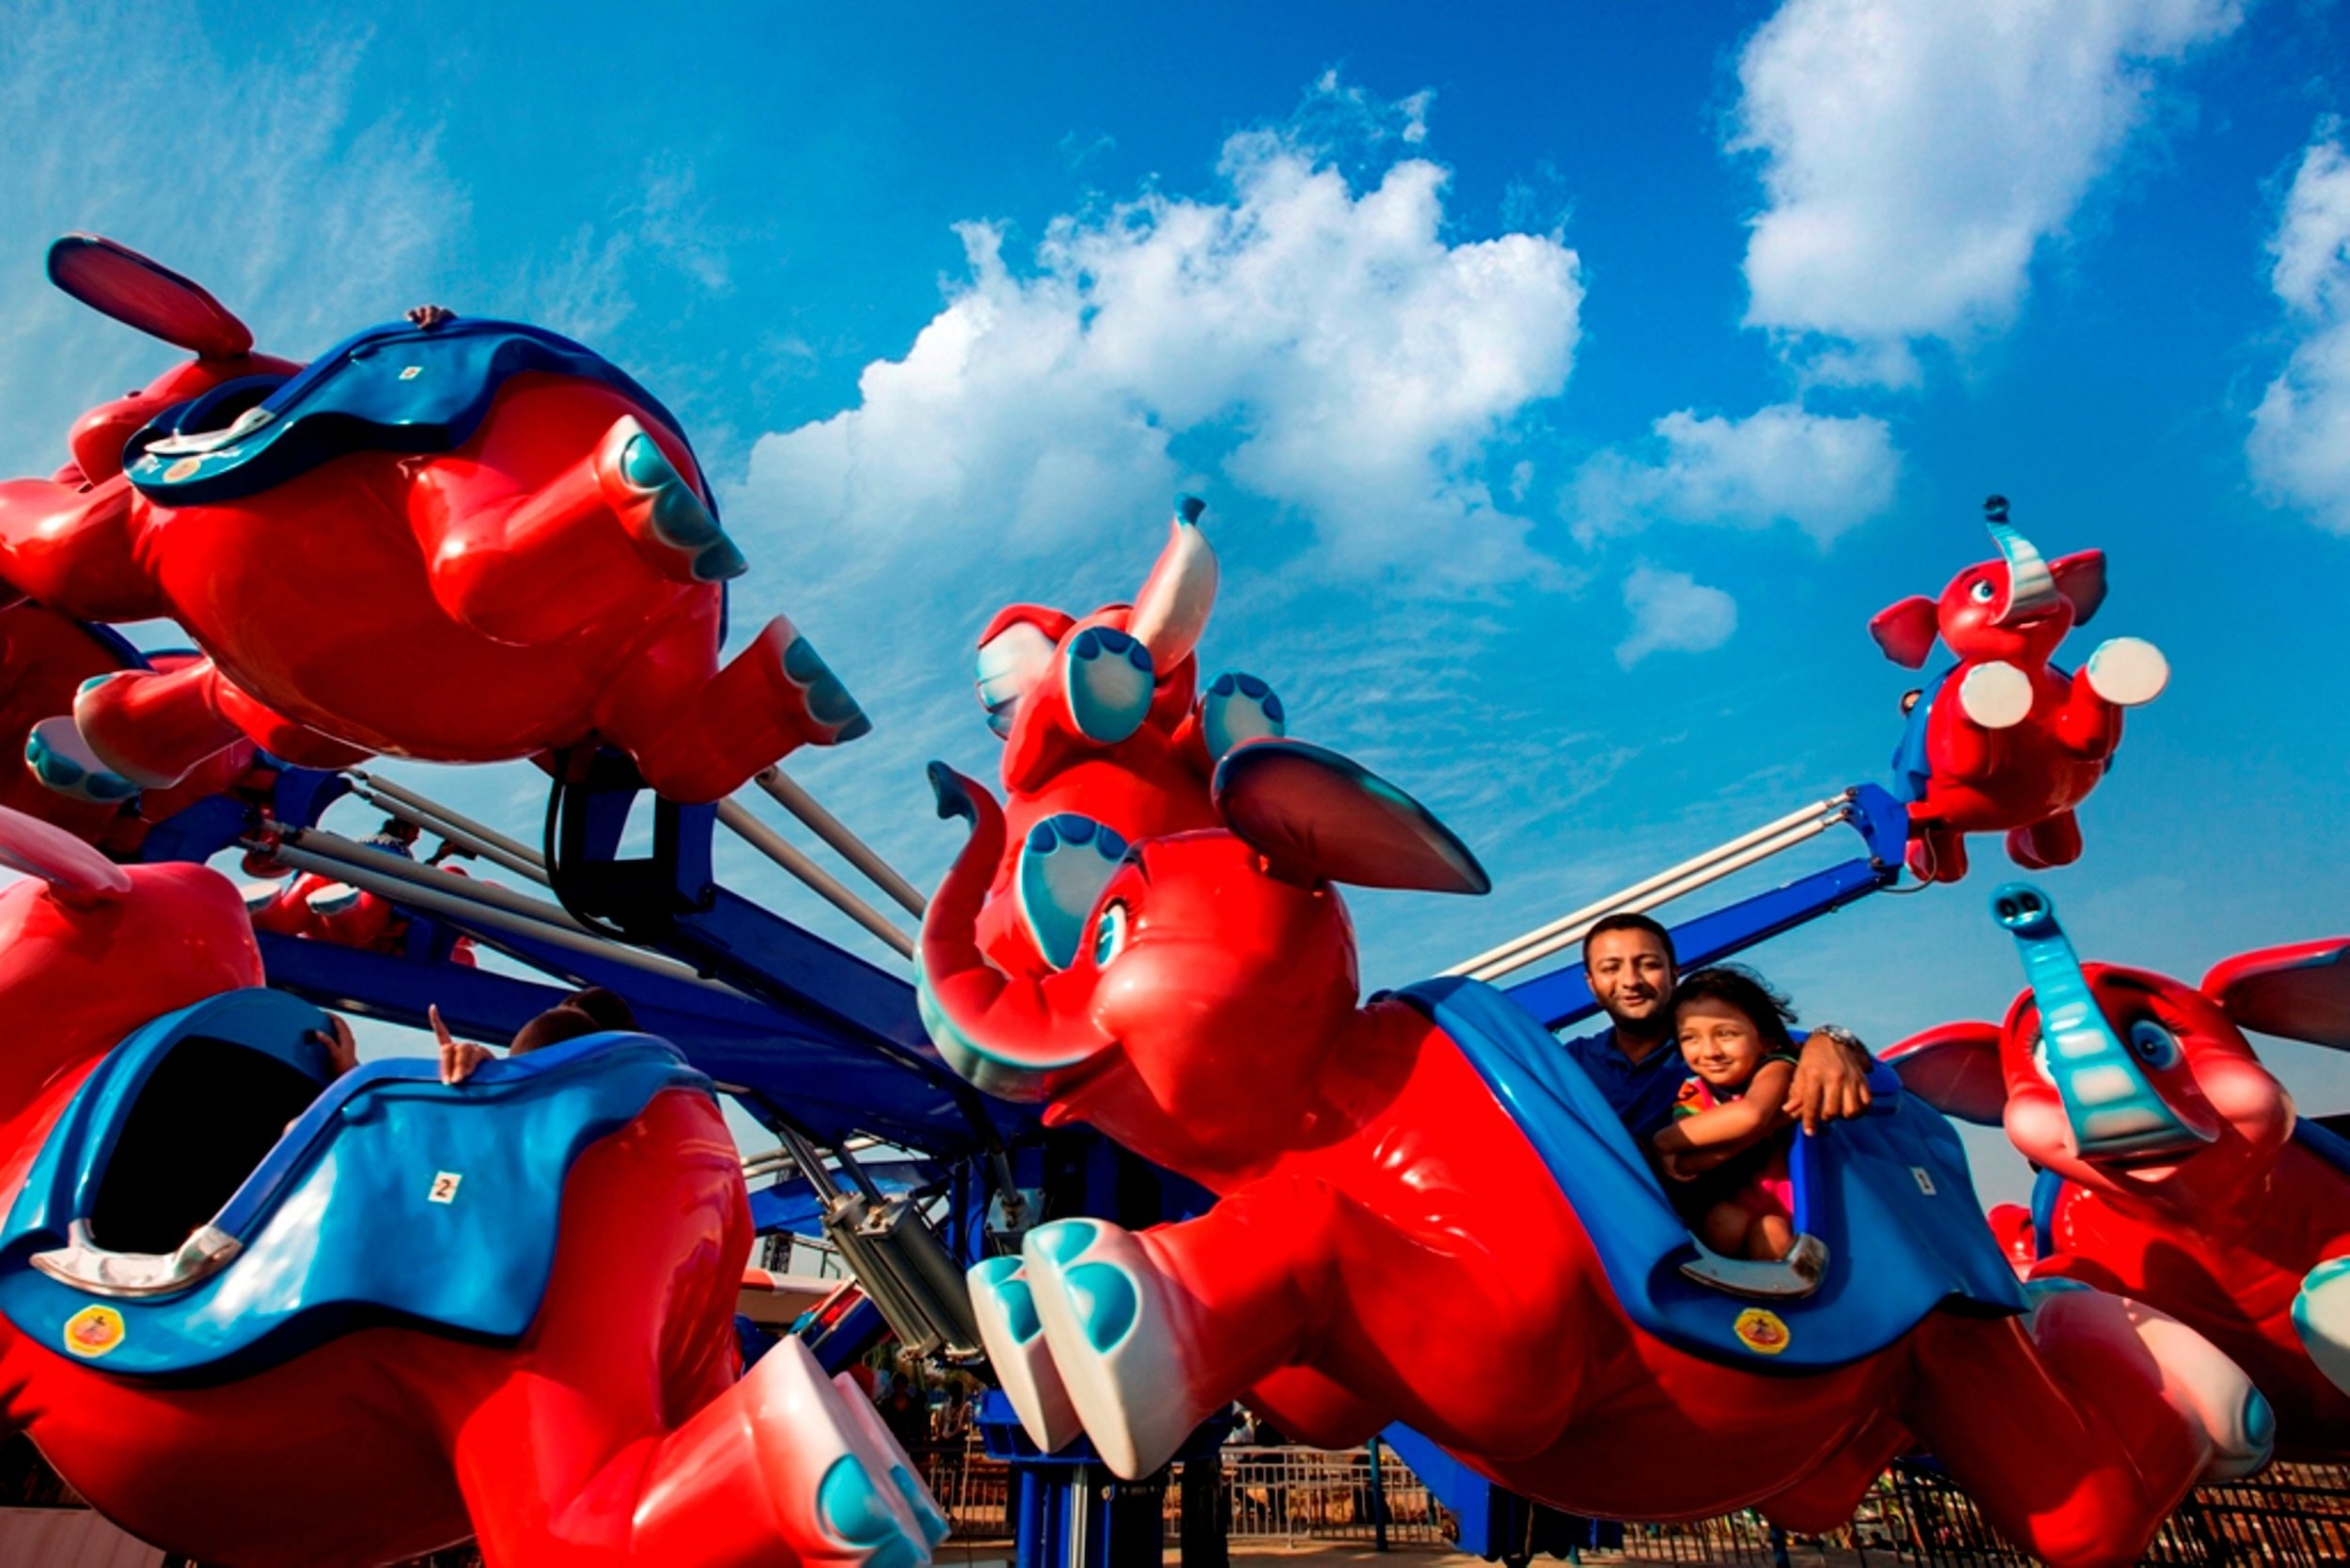 Tubby Takes off at ADLABS IMAGICA